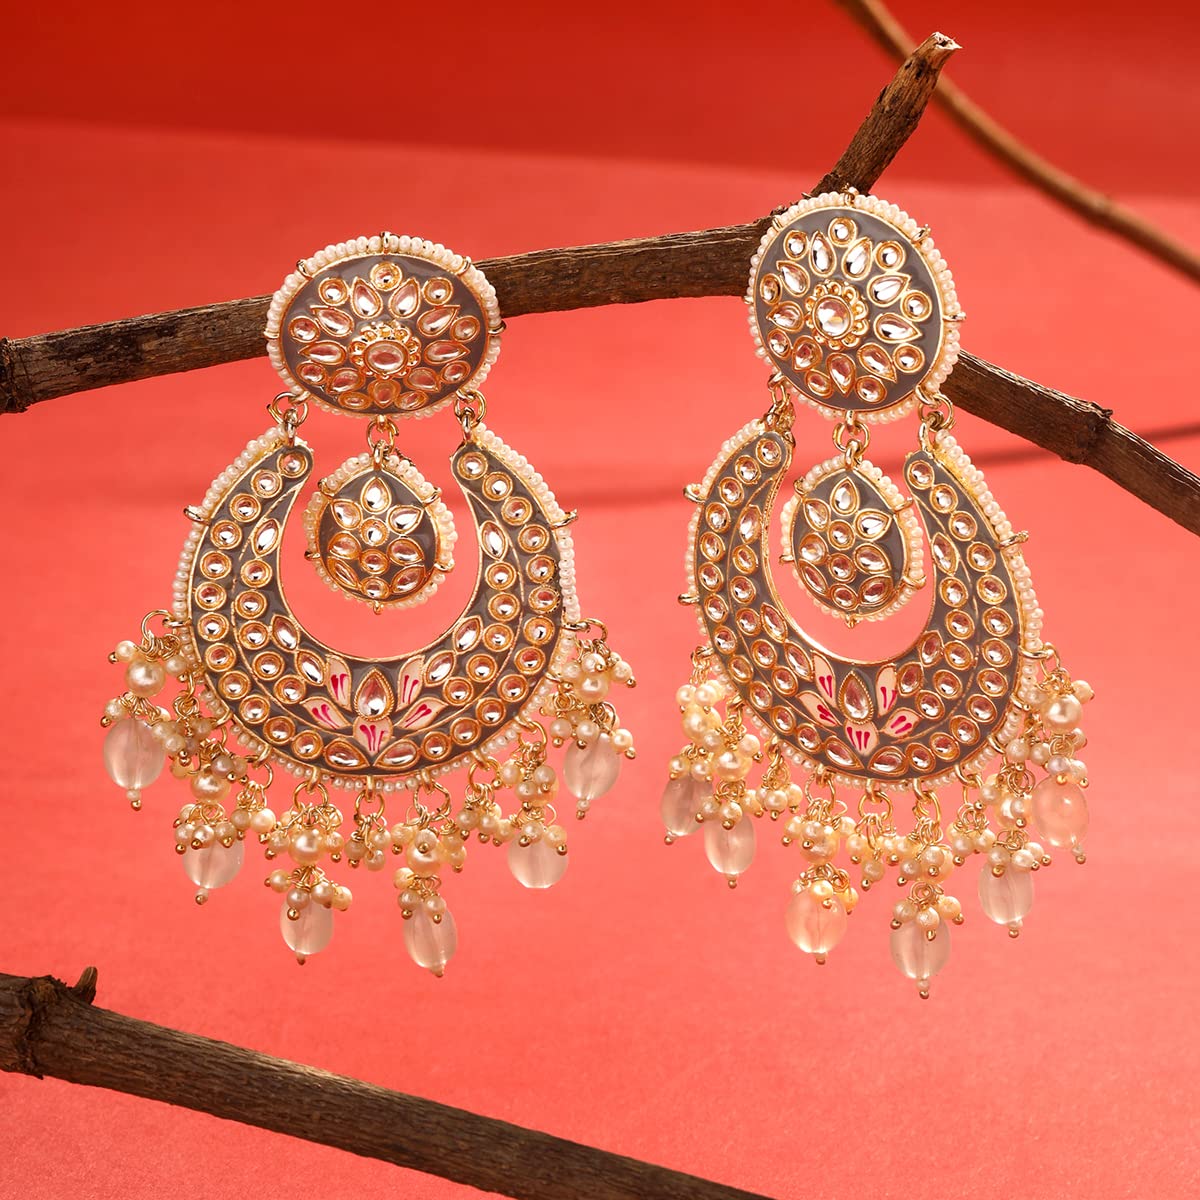 Yellow Chimes Earrings for Women and Girls Traditional Meenakari Chandbali  Gold Toned Grey Meenakari Chandbali Earrings  Birthday Gift for girls and women Anniversary Gift for Wife